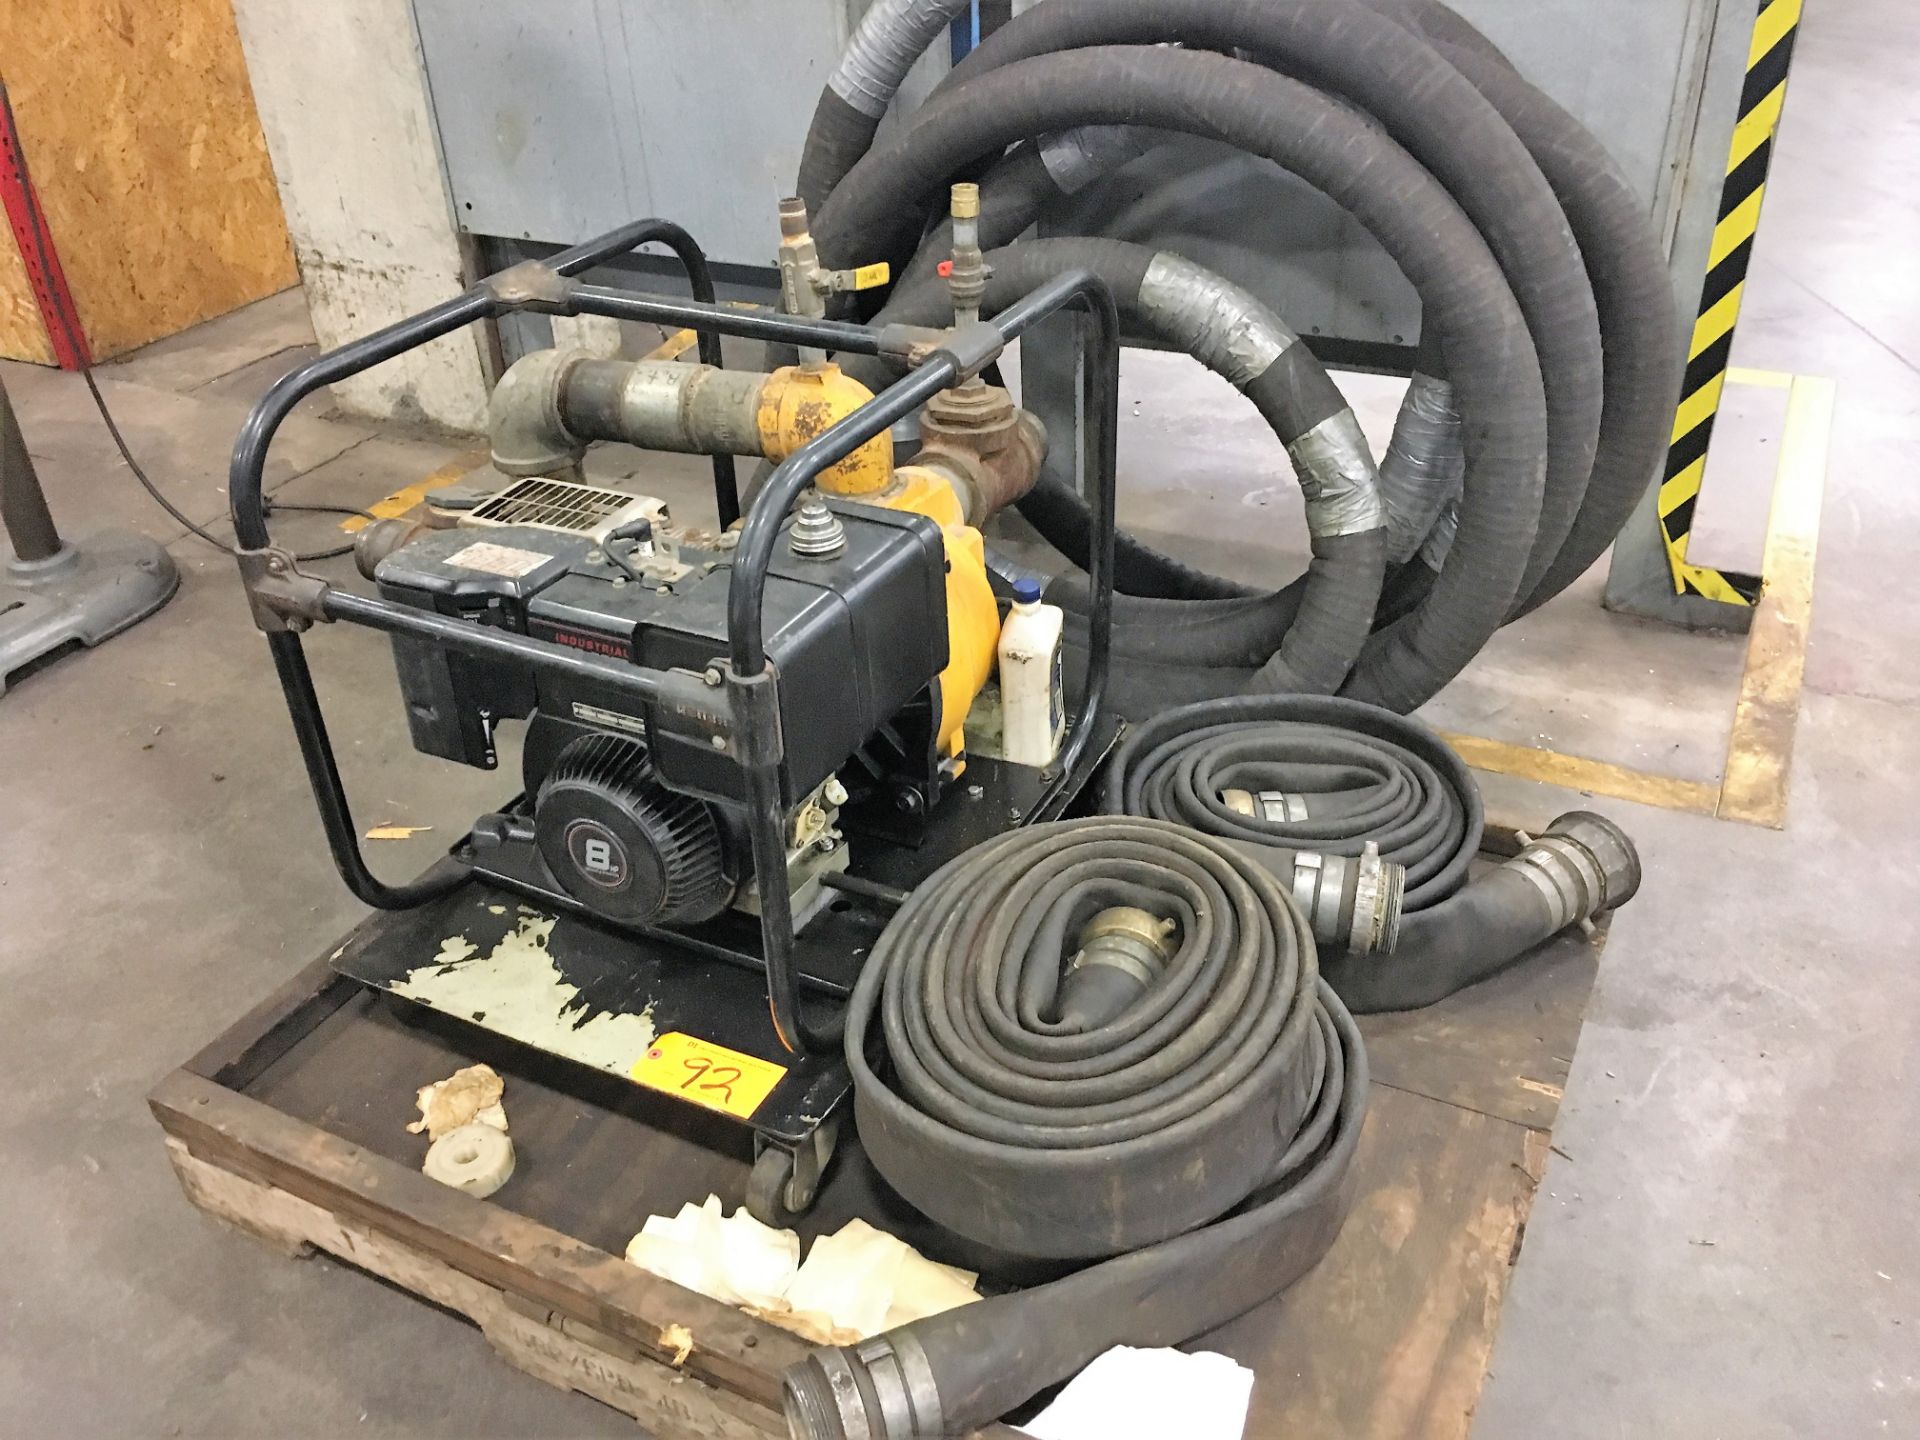 Industrial Plus 8 HP Briggs & Stratton Water Pump with Hoses - Image 2 of 3